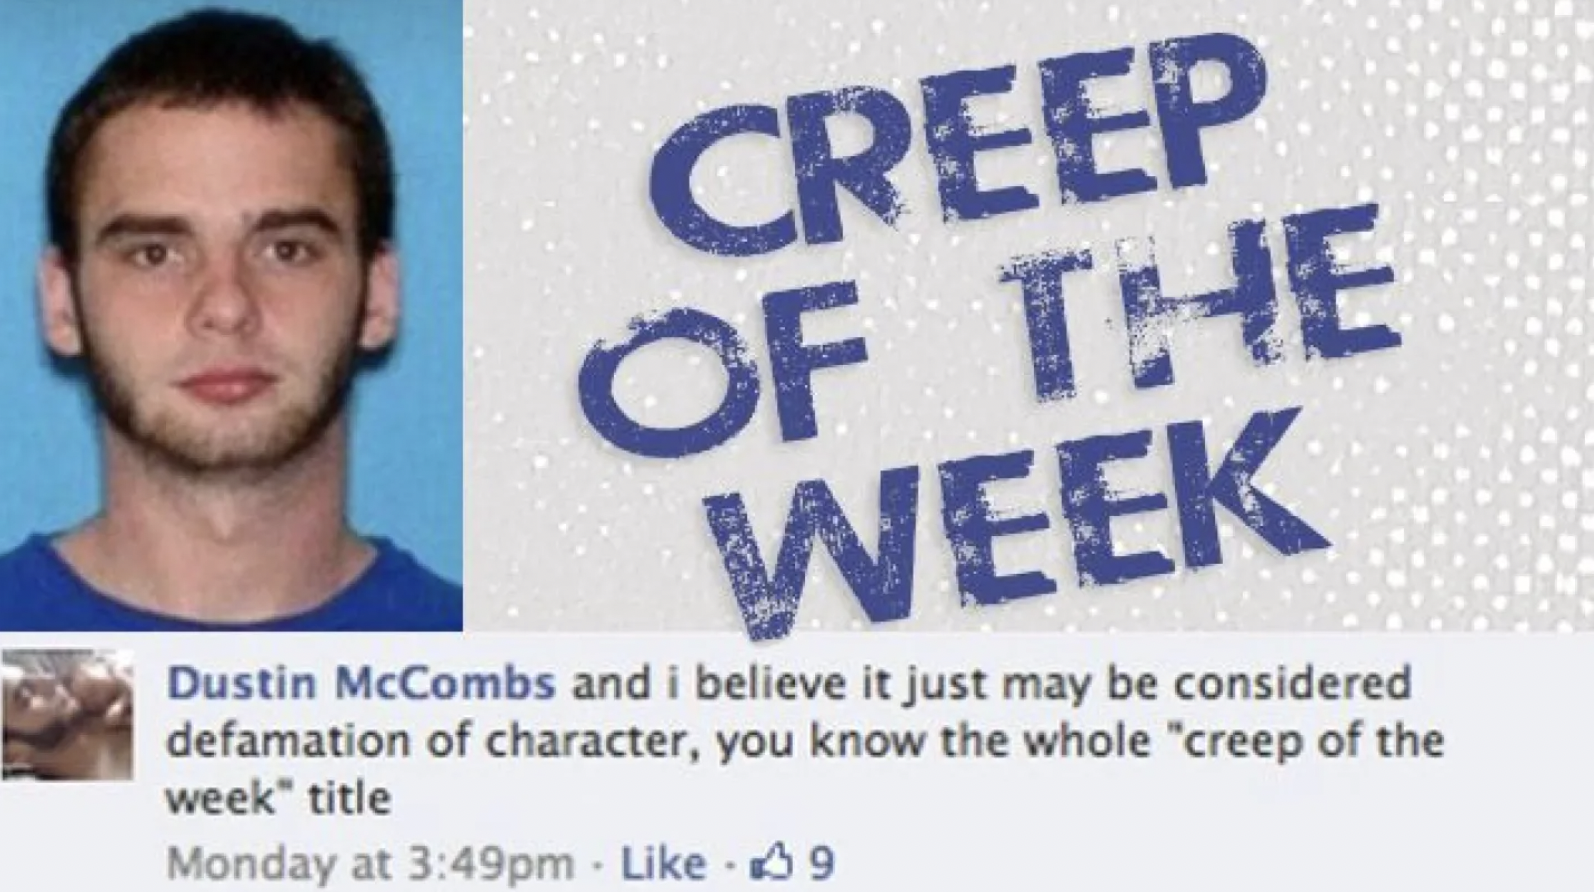 photo caption - Creep Of The Week Dustin McCombs and i believe it just may be considered defamation of character, you know the whole "creep of the week" title Monday at pm 9